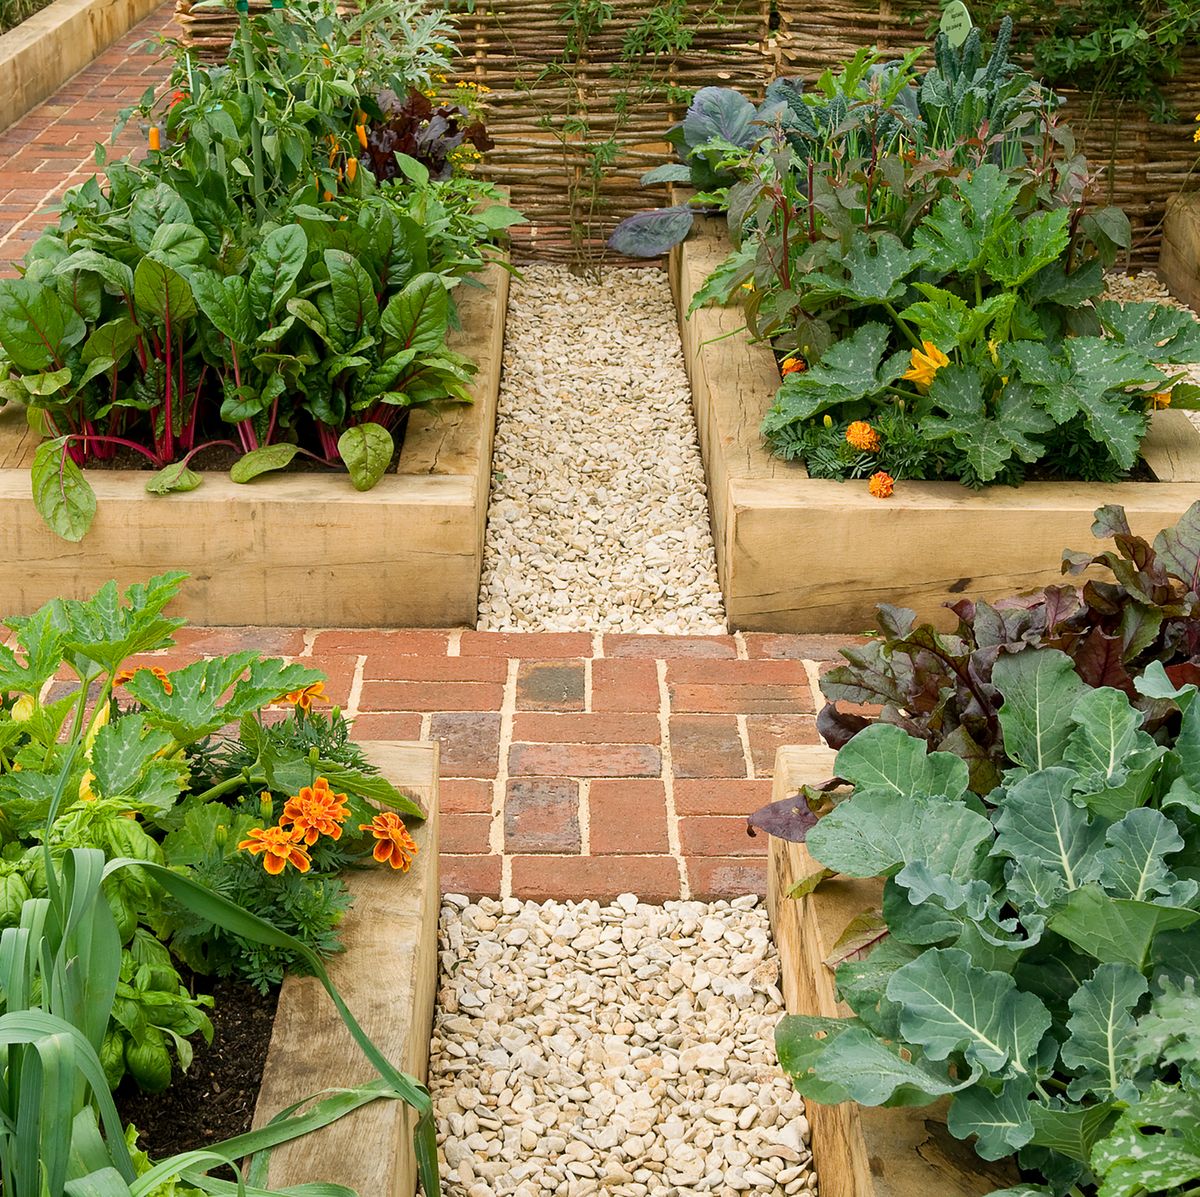 How to Create an Easy, Fast and Economical Raised Garden Bed